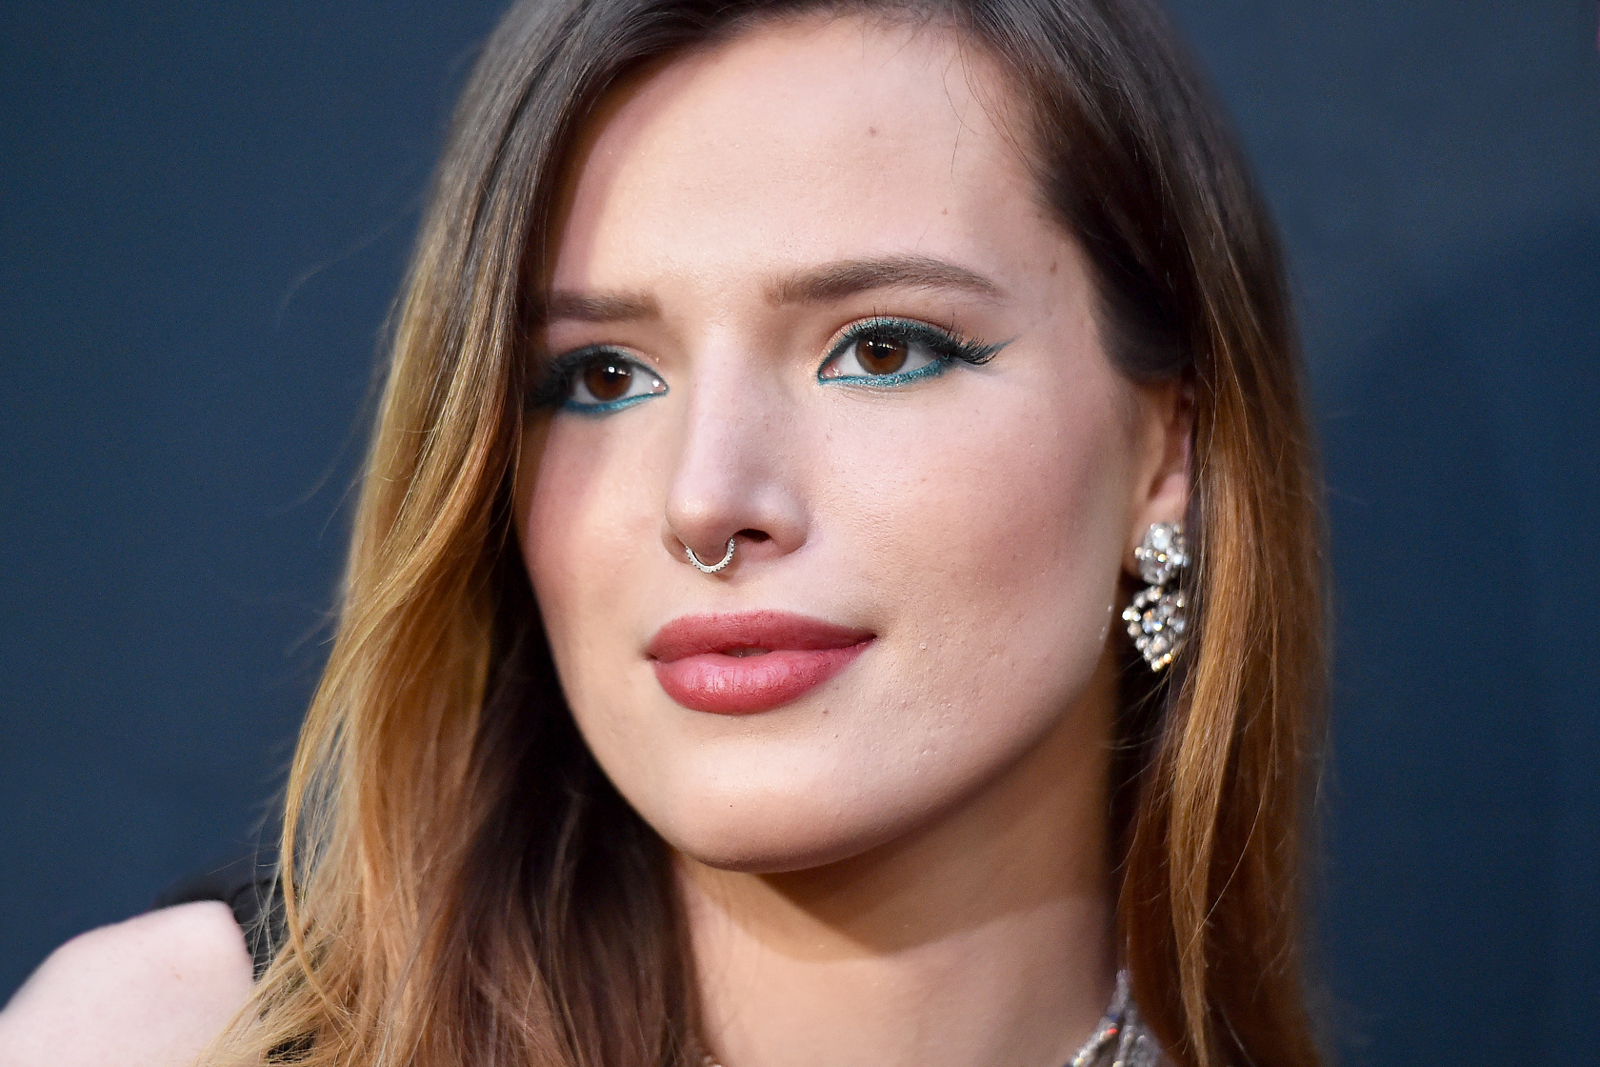 Close Up Bella Thorne Porn - Bella Thorne thanks Zendaya for her support in the wake of nude photos row